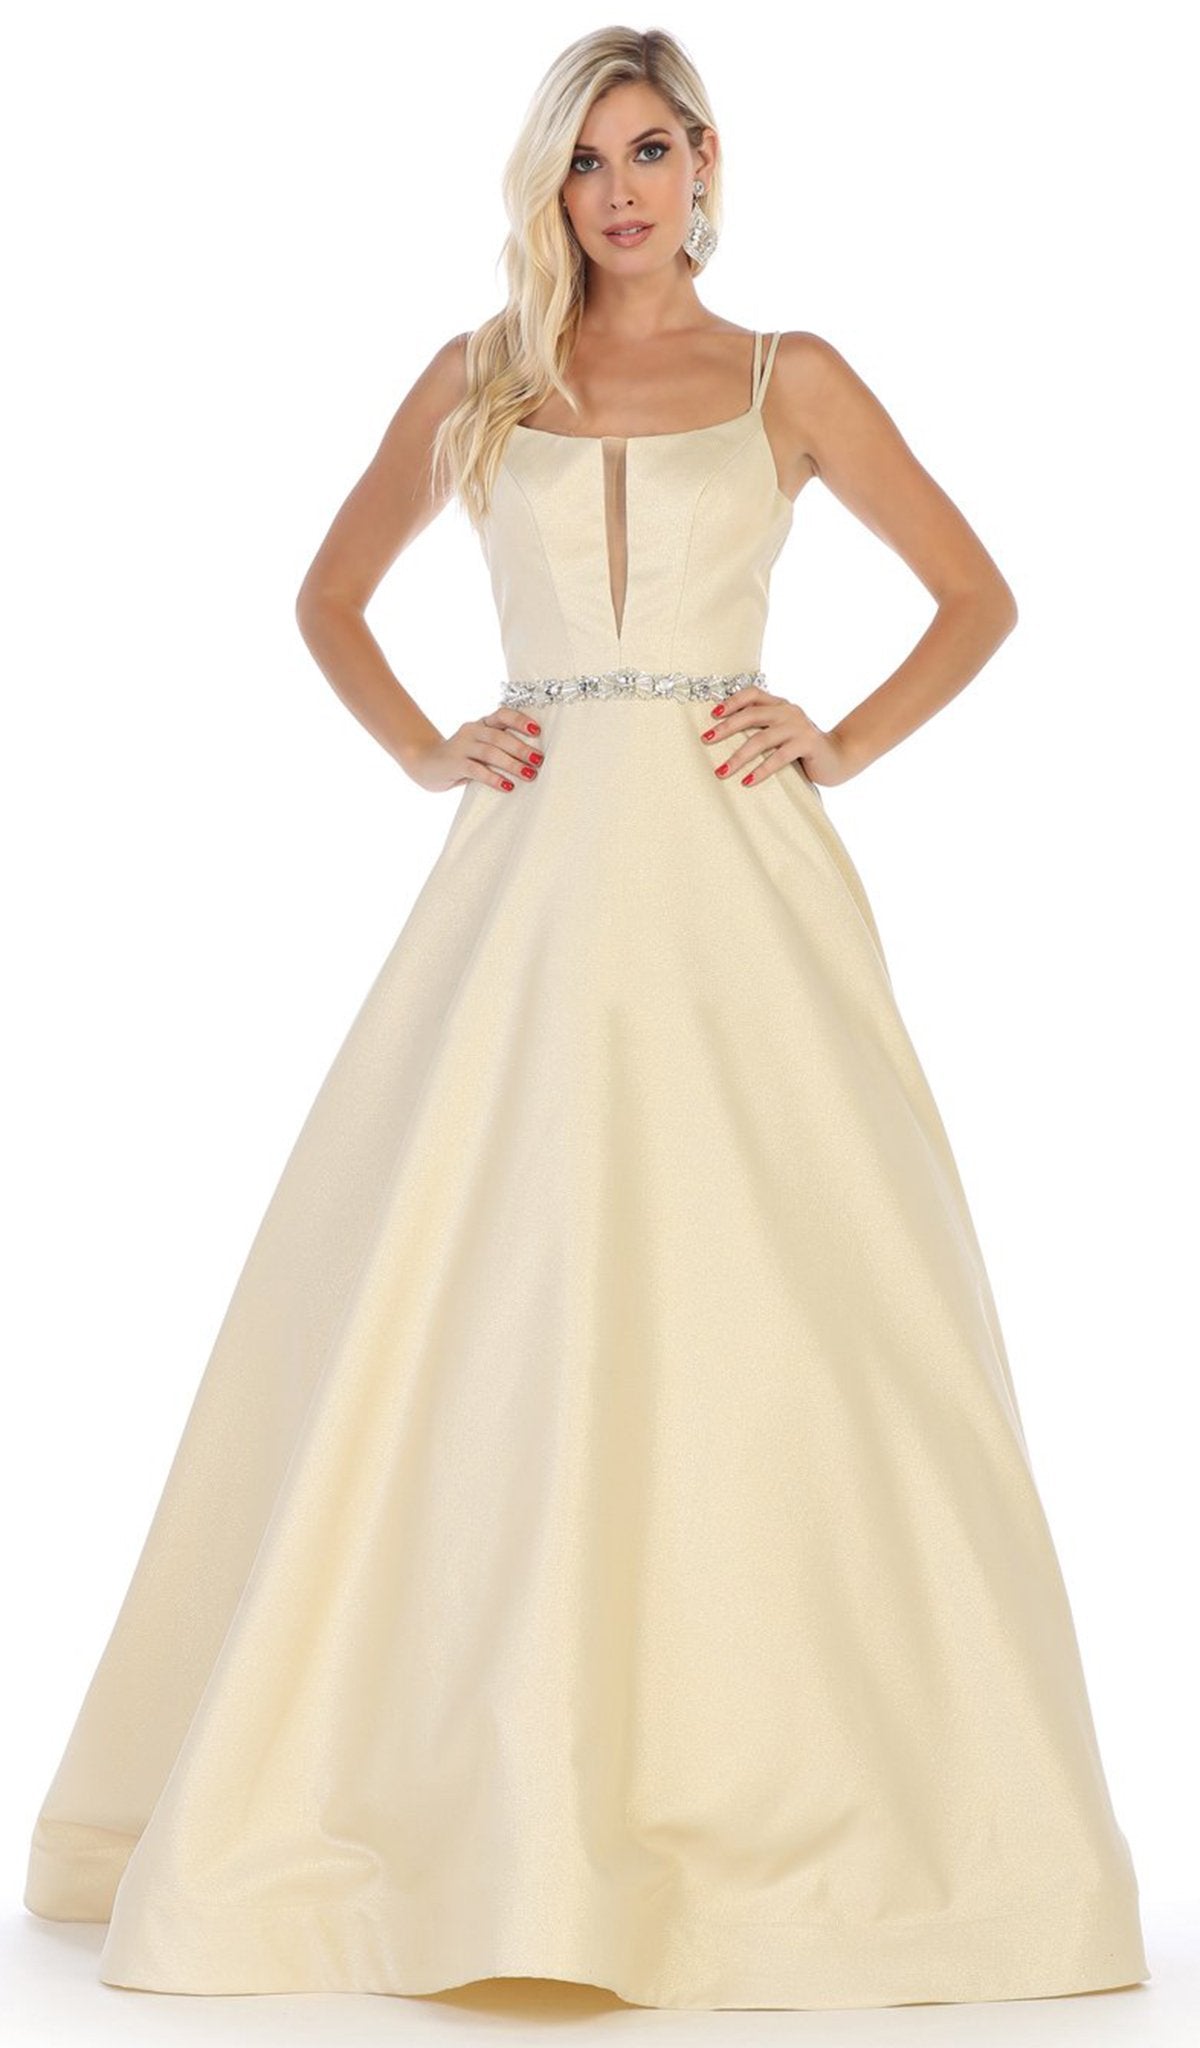 May Queen - RQ7734 Embellished Scoop Neck Ballgown With Strappy Back In Gold